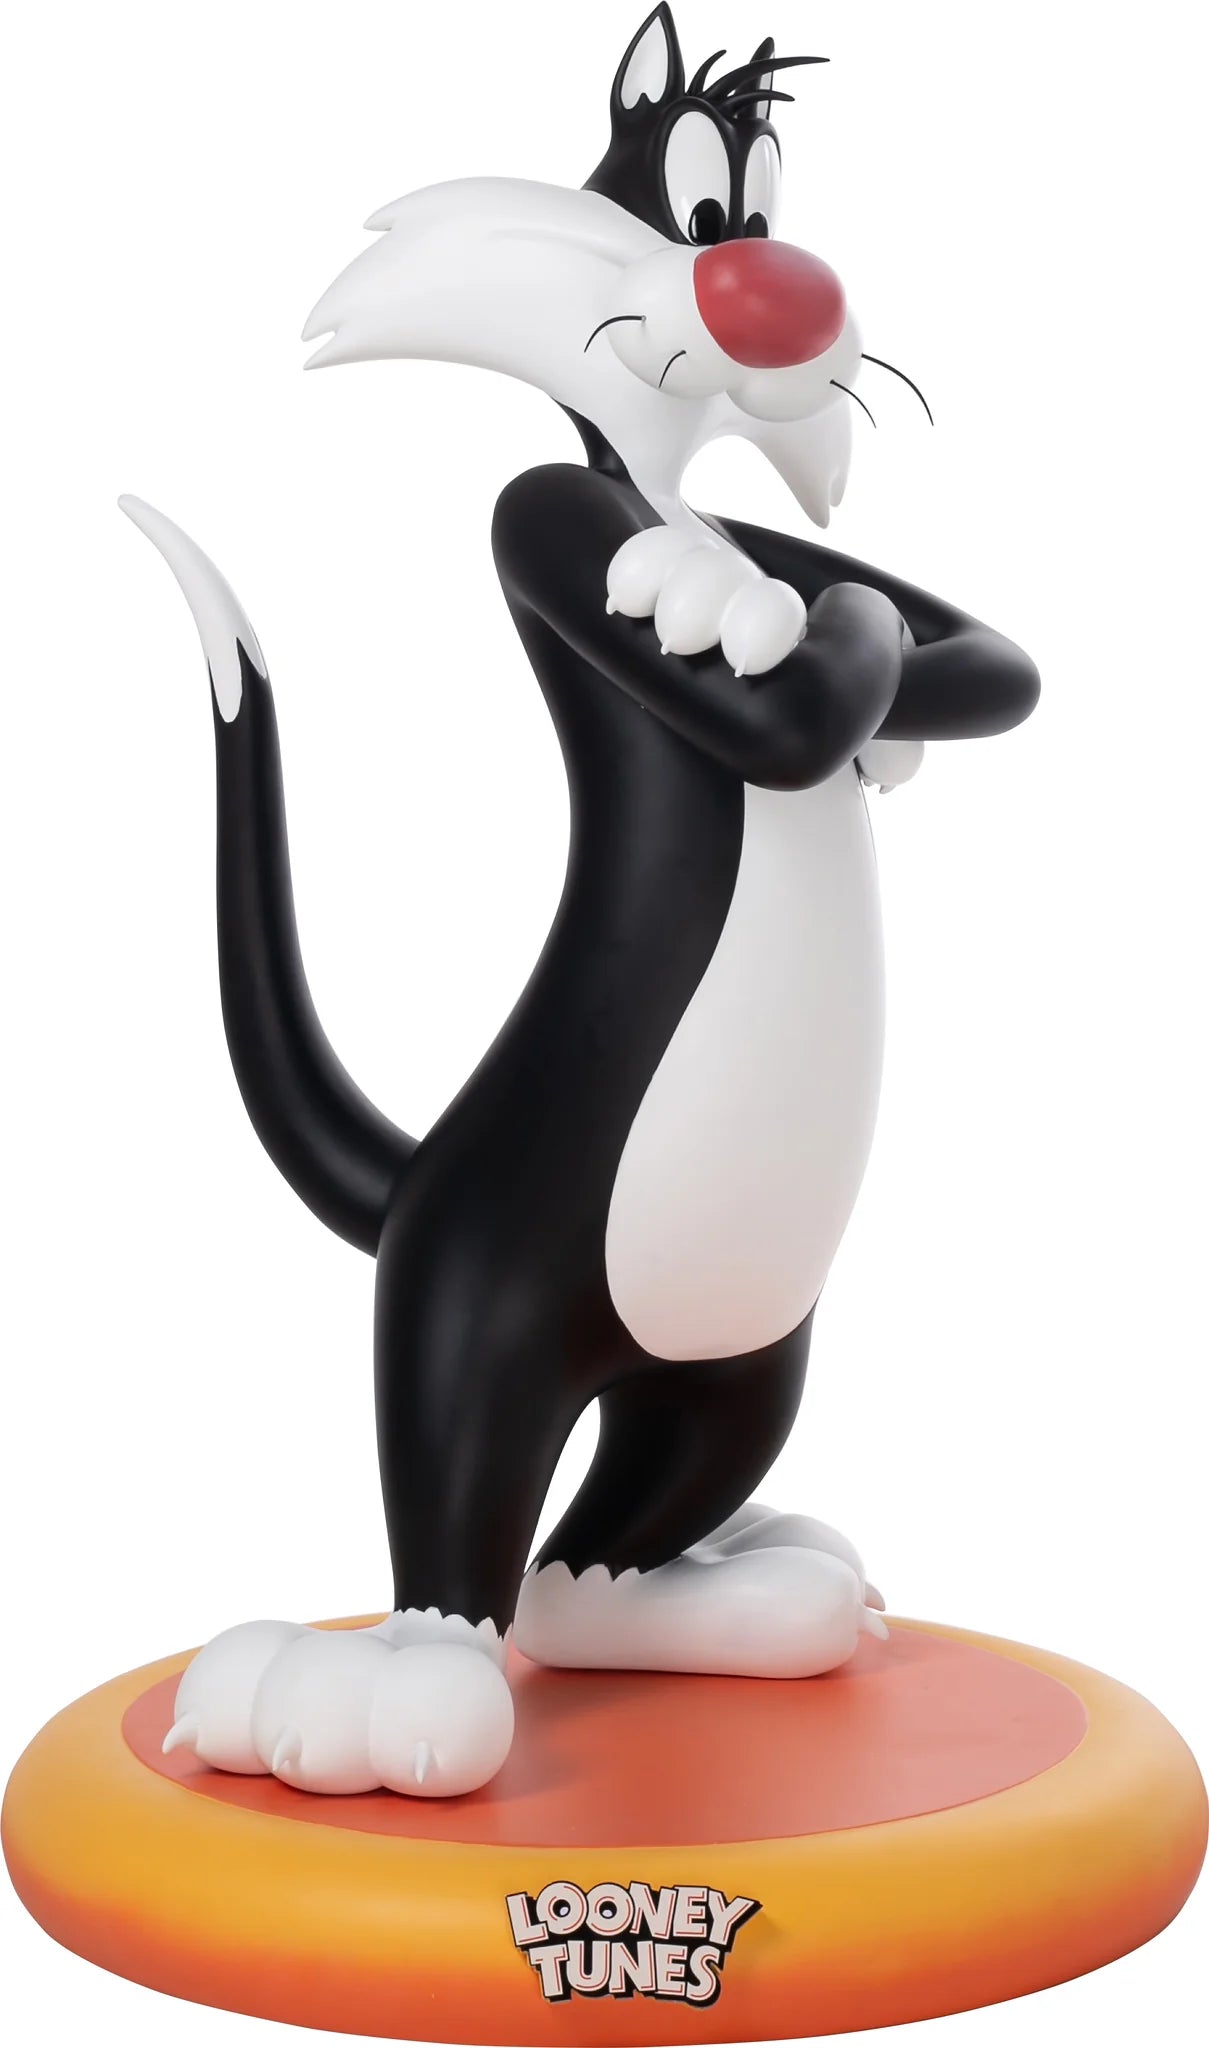 Looney Tunes Sylvester The Cat On Base Life Size Statue - image 2 of 2